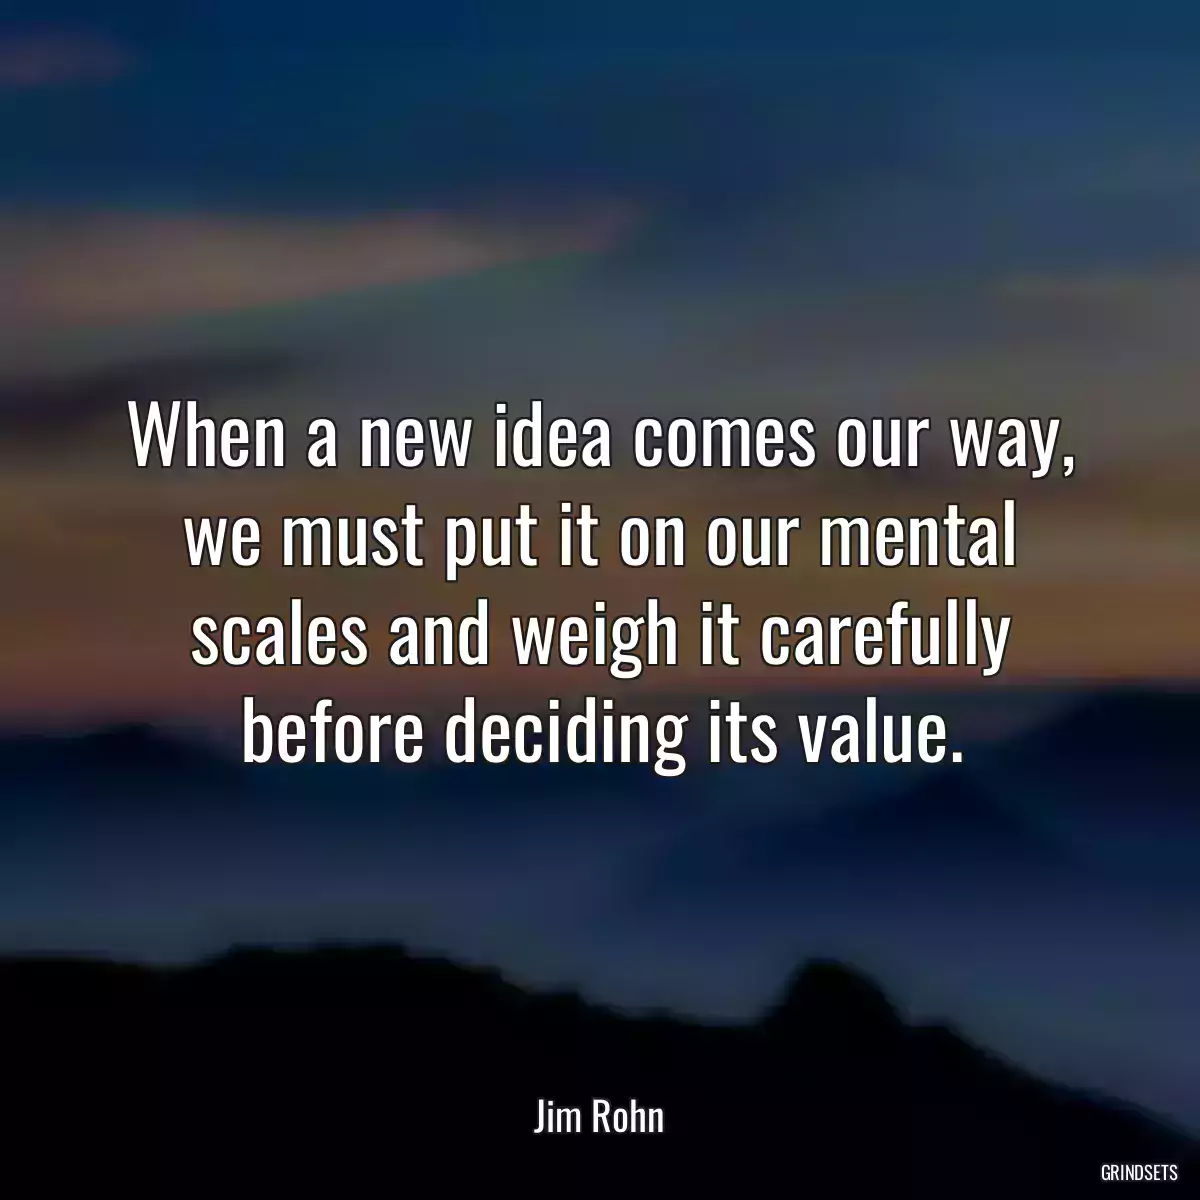 When a new idea comes our way, we must put it on our mental scales and weigh it carefully before deciding its value.